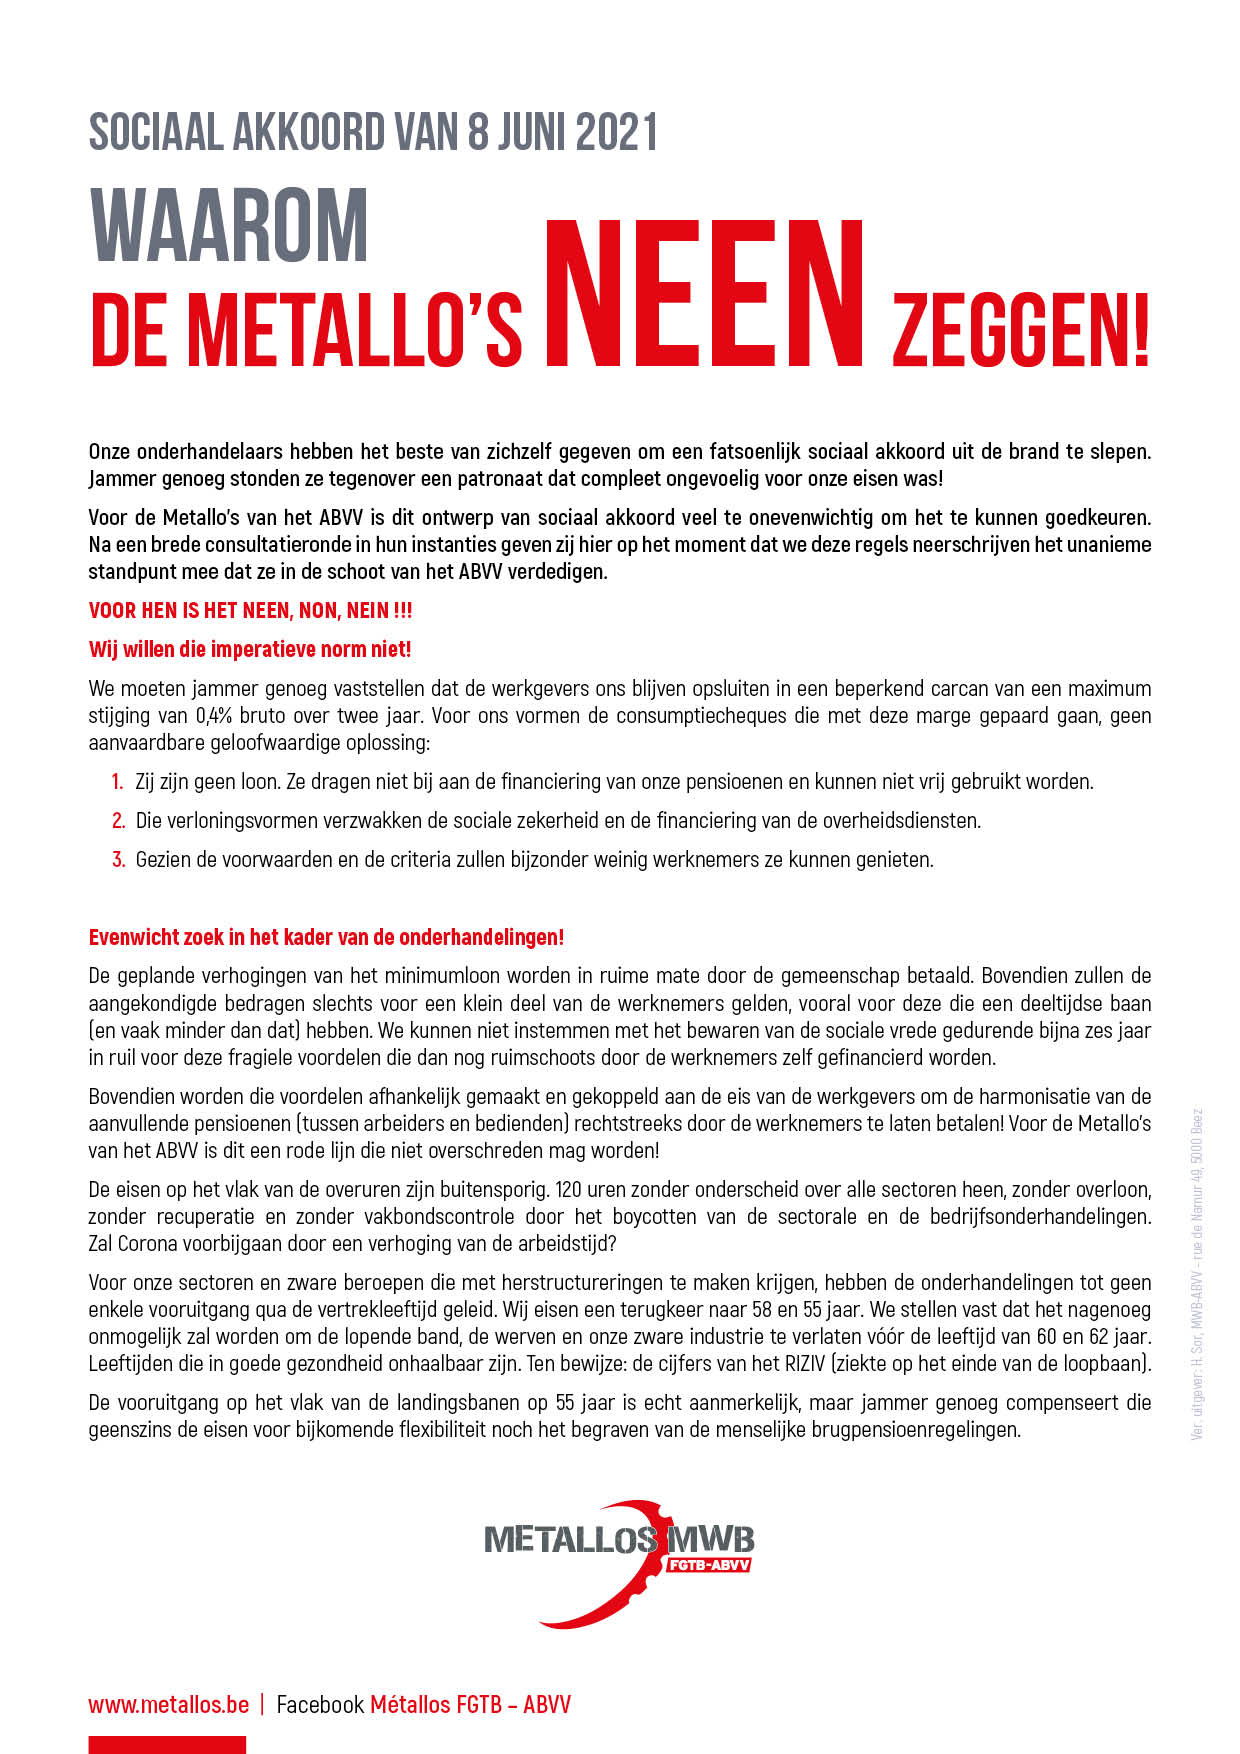 https://www.metallos.be/sites/default/files/images/2104%239%20MWB%20AIP%20NON%20NL%20A.jpg